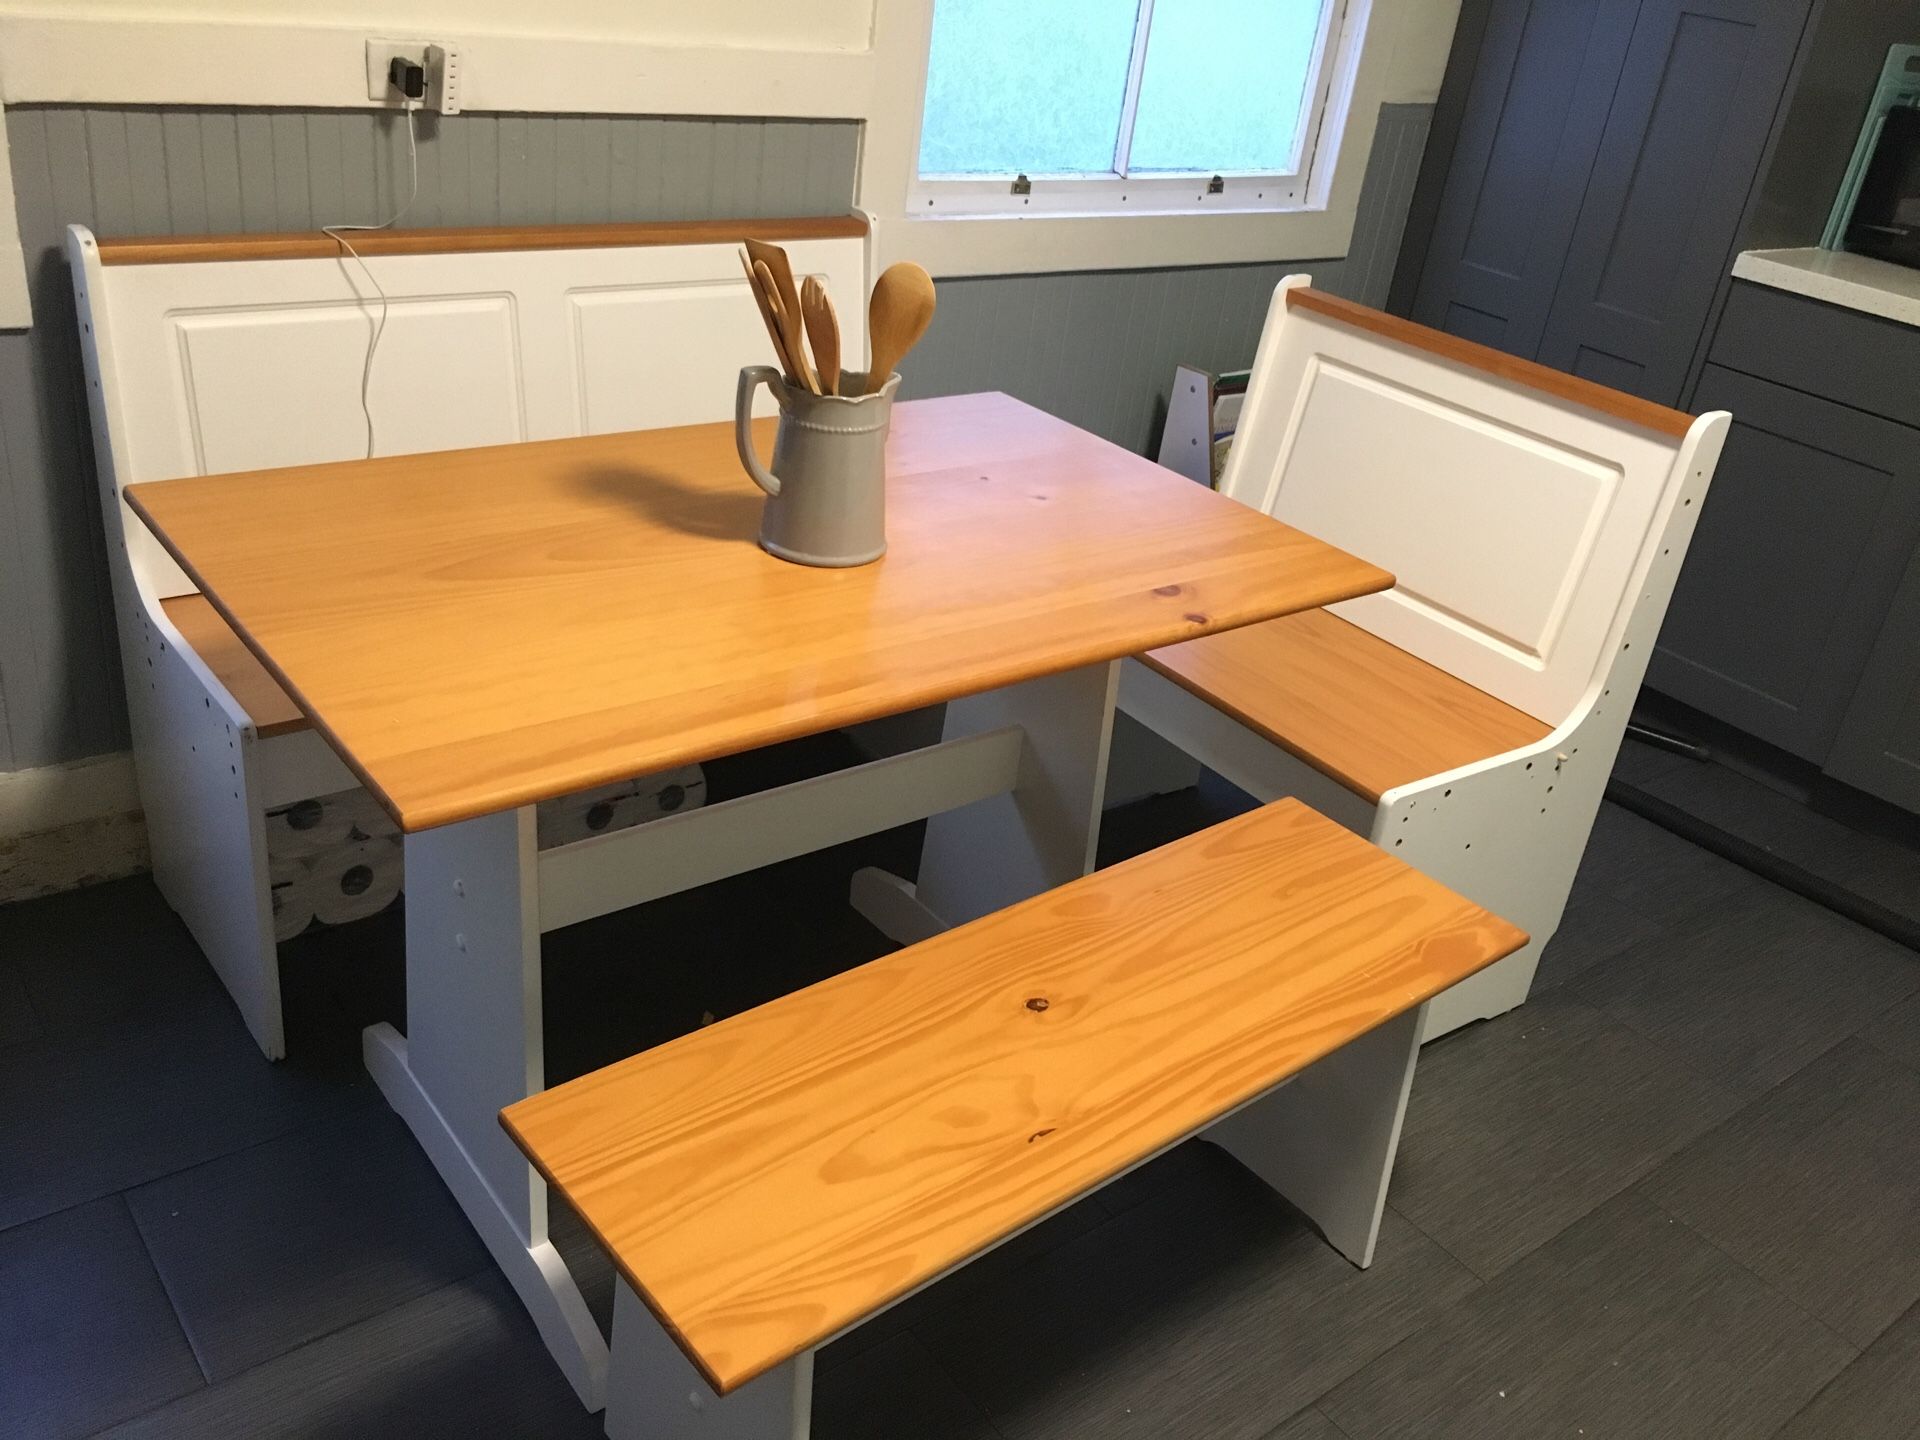 Breakfast Table with 3 benches